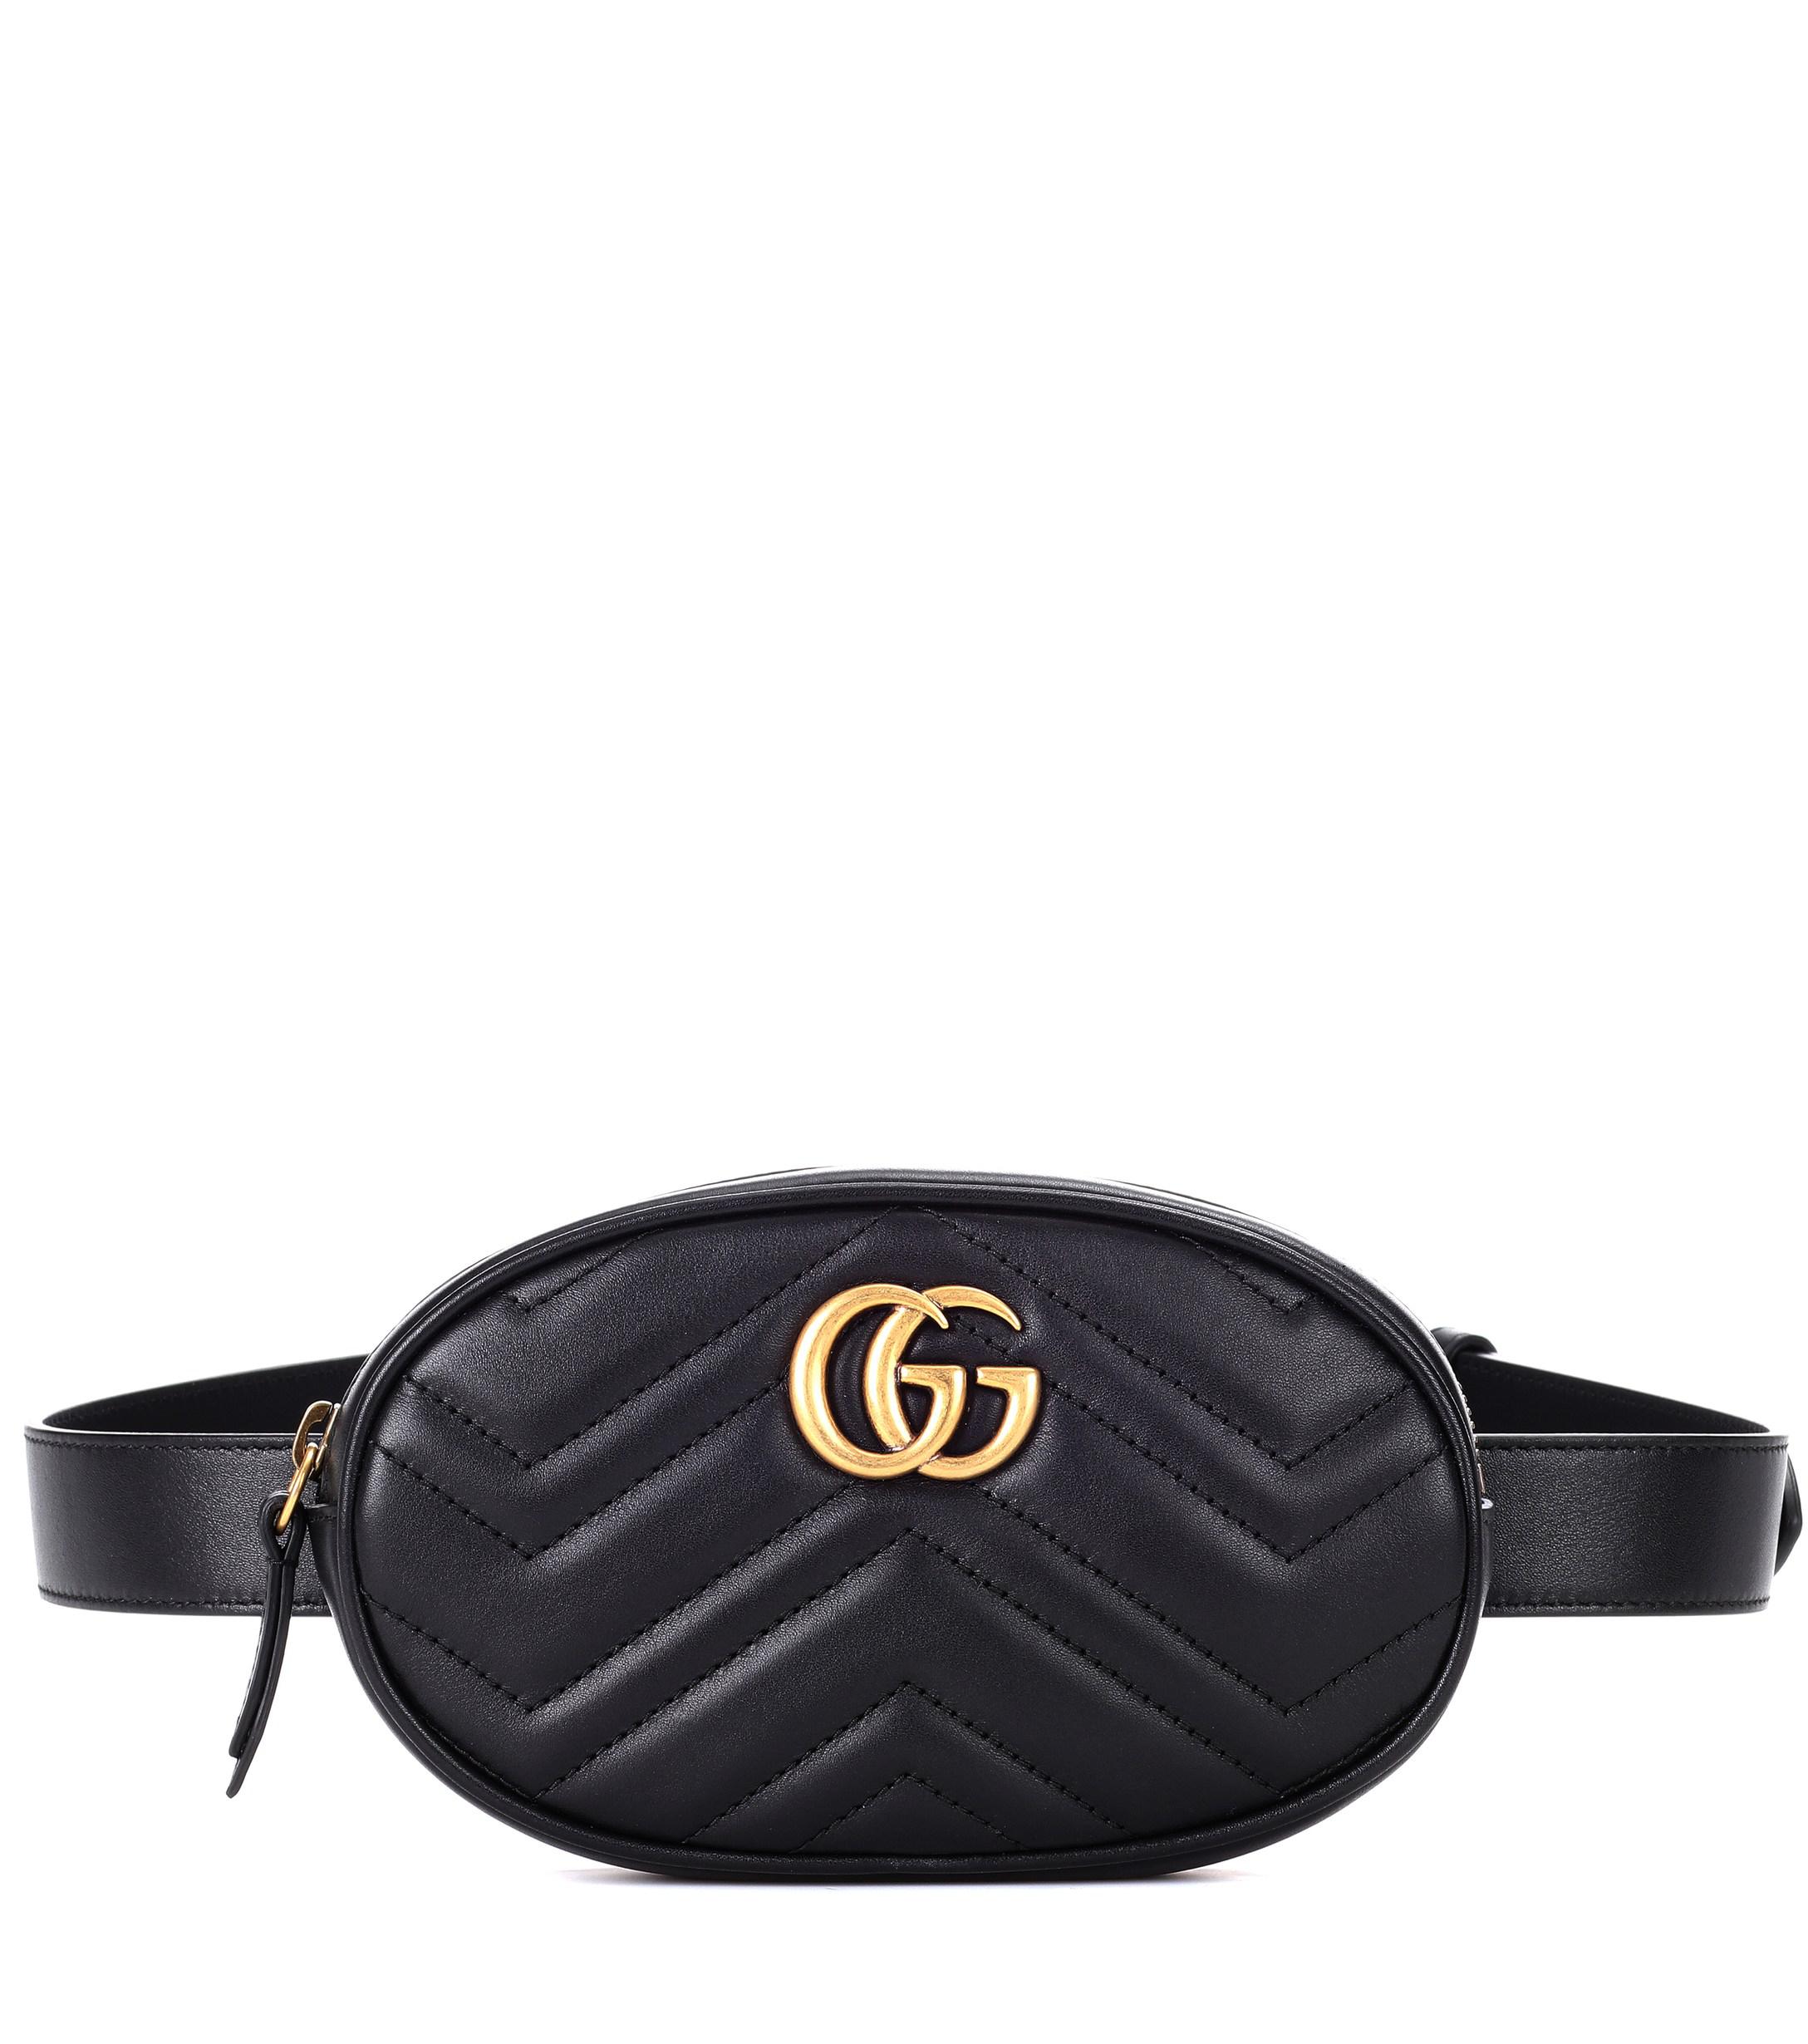 Look for Less: Gucci 'Marmont' Belt Bag